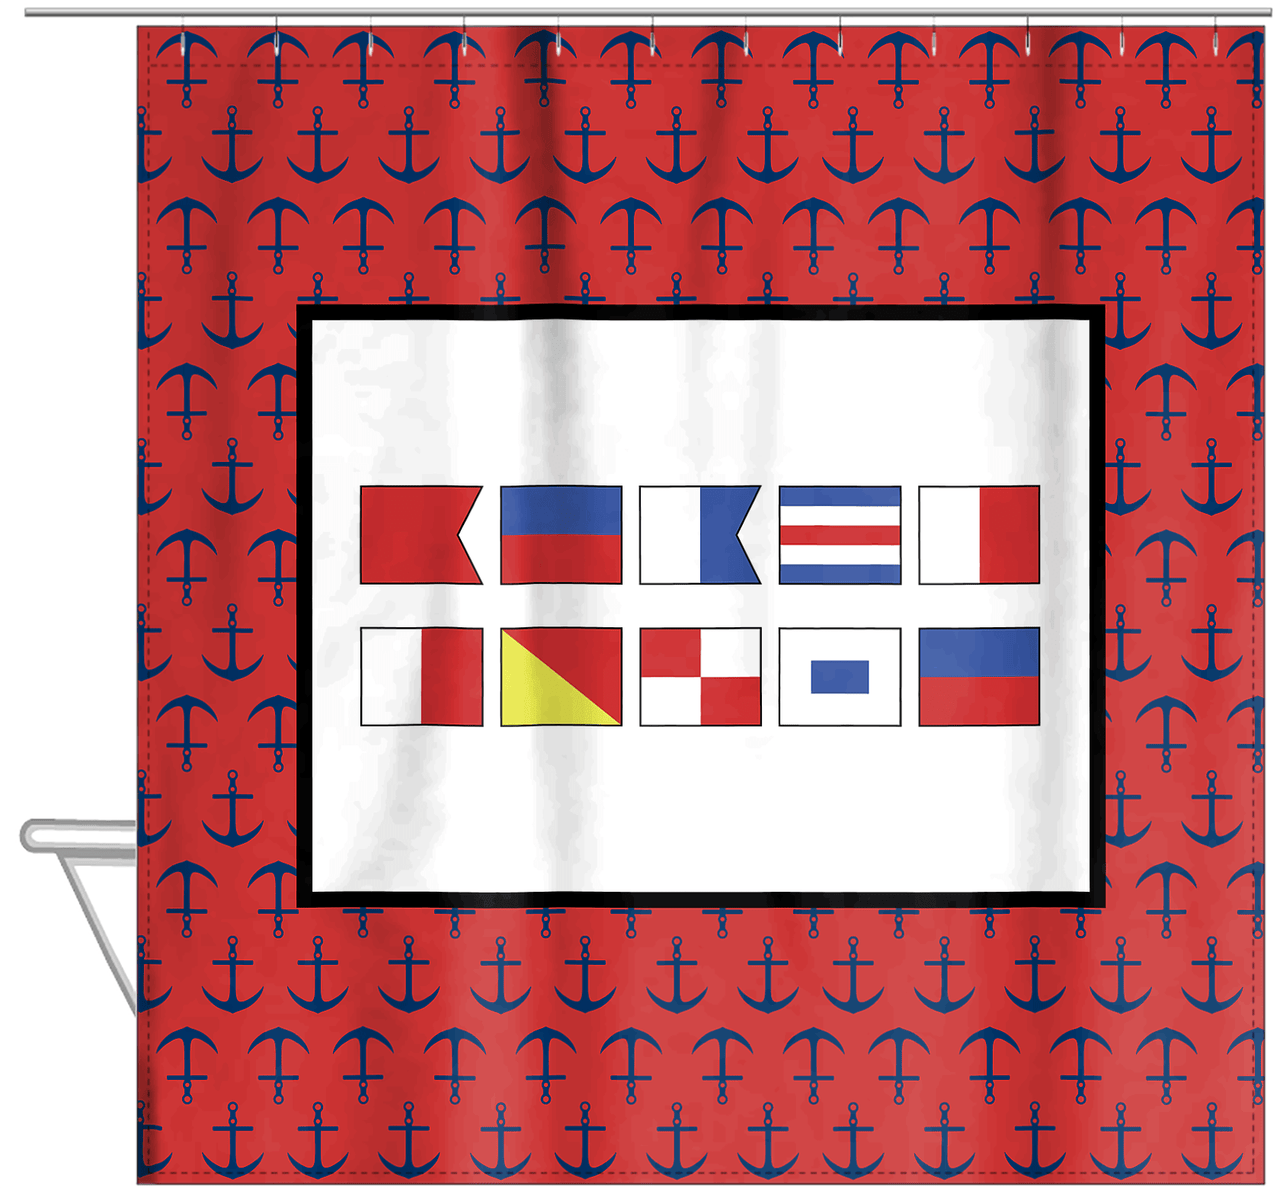 Personalized Nautical Flags Shower Curtain with Anchors - Red and Black - Flags without Letters - Hanging View